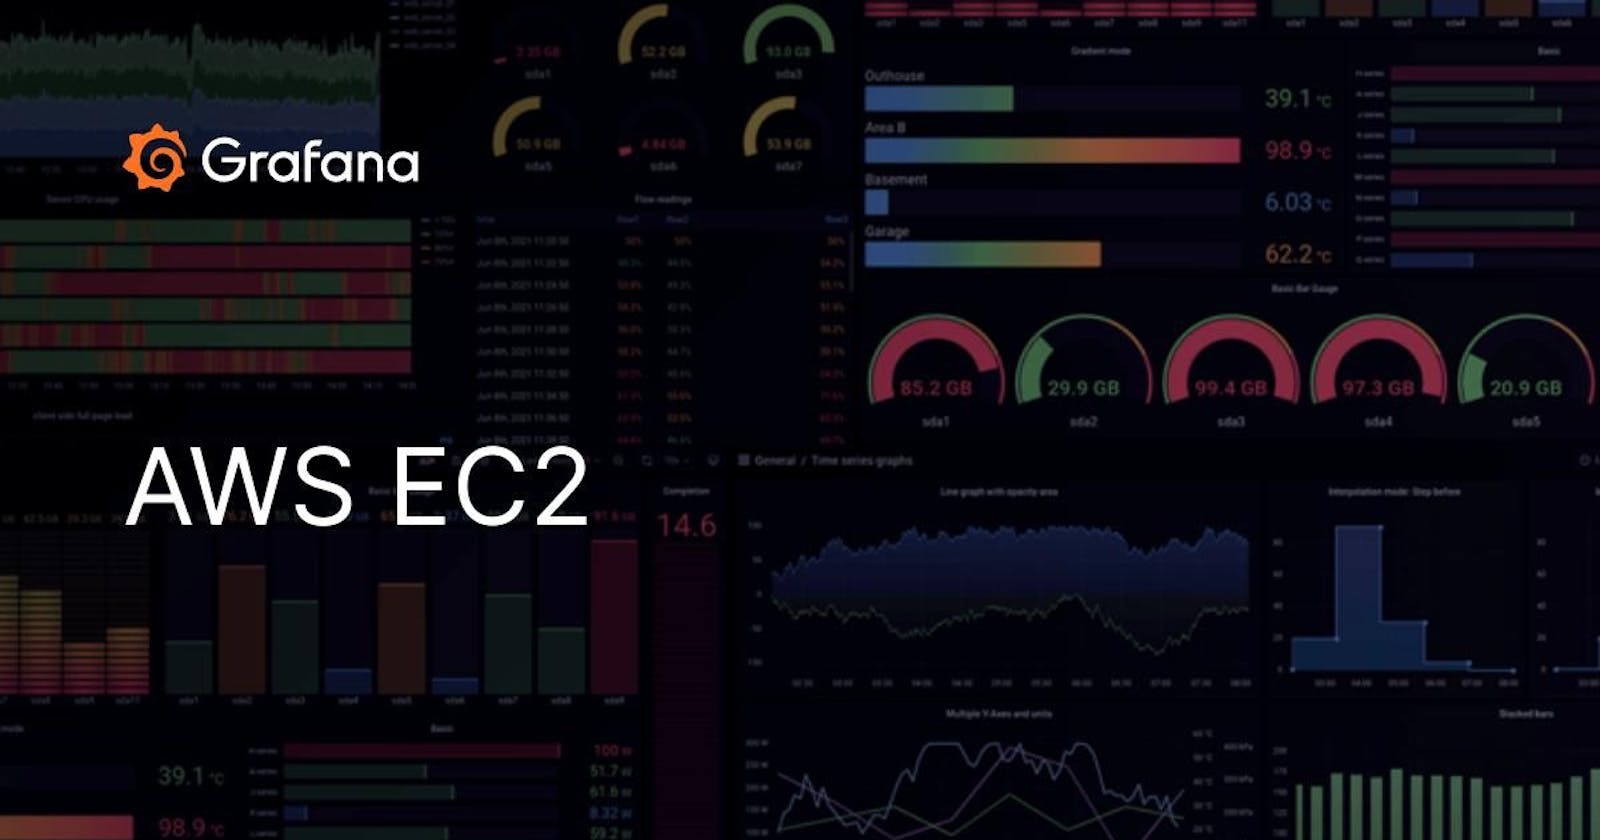 Day 73: Title: Setting Up Grafana on AWS EC2: A Step-by-Step Guide